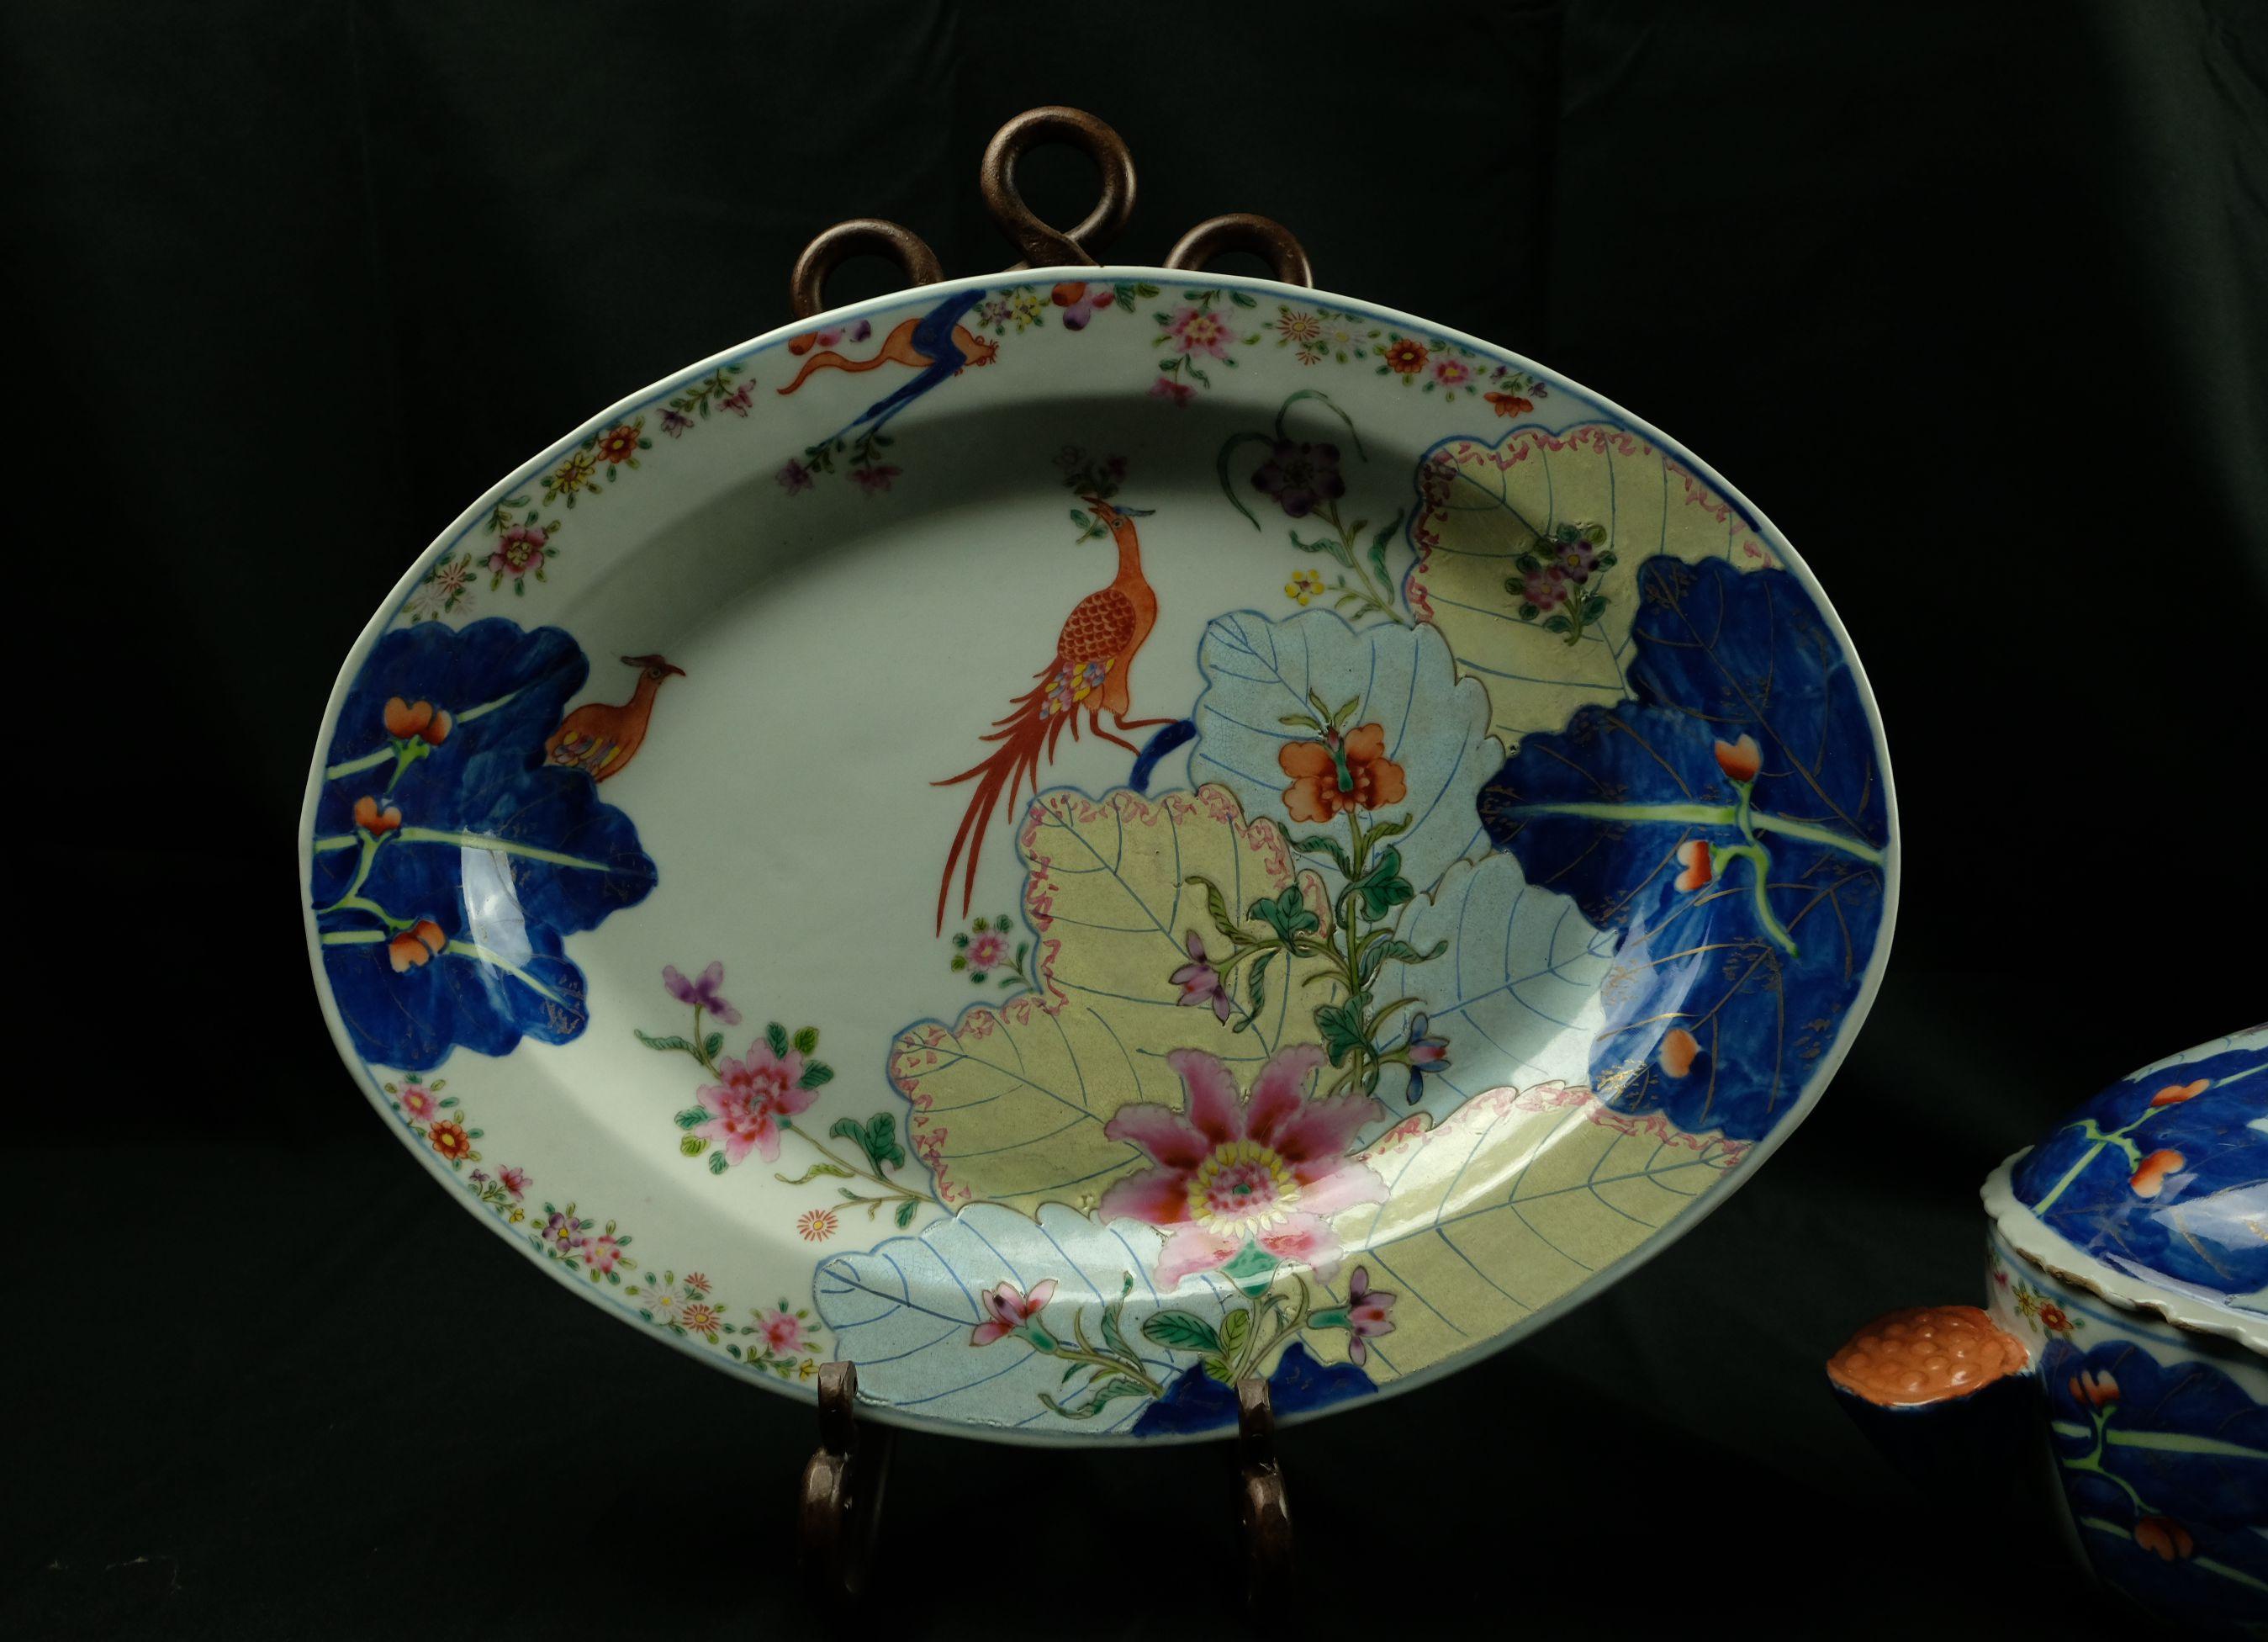 A Very fine quality Chinese antique porcelain tureen painted in vivid Famille rose enamels in classic Tobacco Leaf Style. Tobacco Leaf, one of the most prized of Chinese Export patterns, in the 1770s. This piece was painted with a colorful and warm